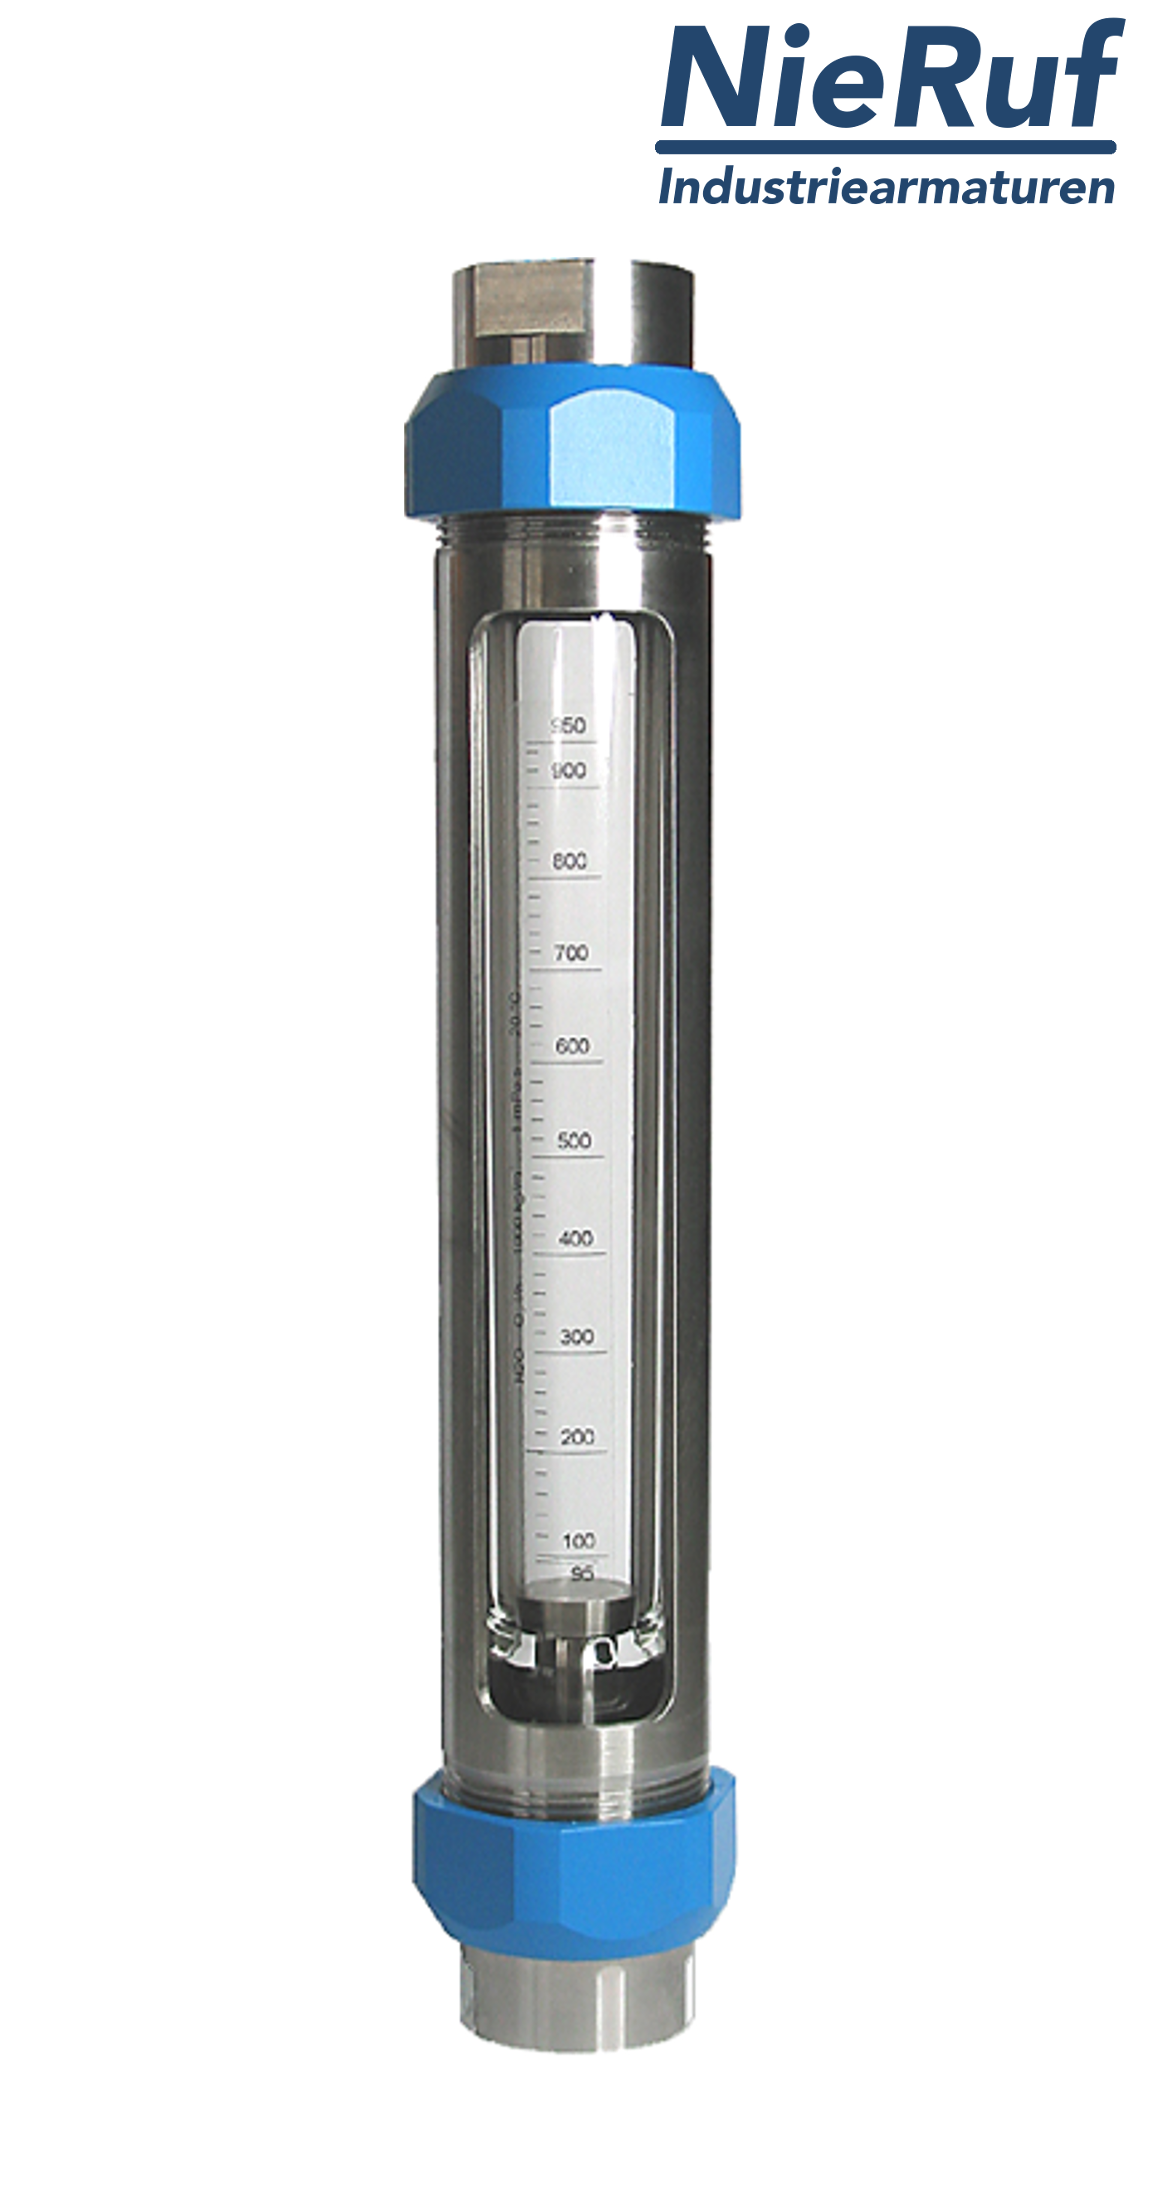 Variable area flowmeter stainless steel + borosilicate 1" Inch 250.0 - 2500 l/h water FKM